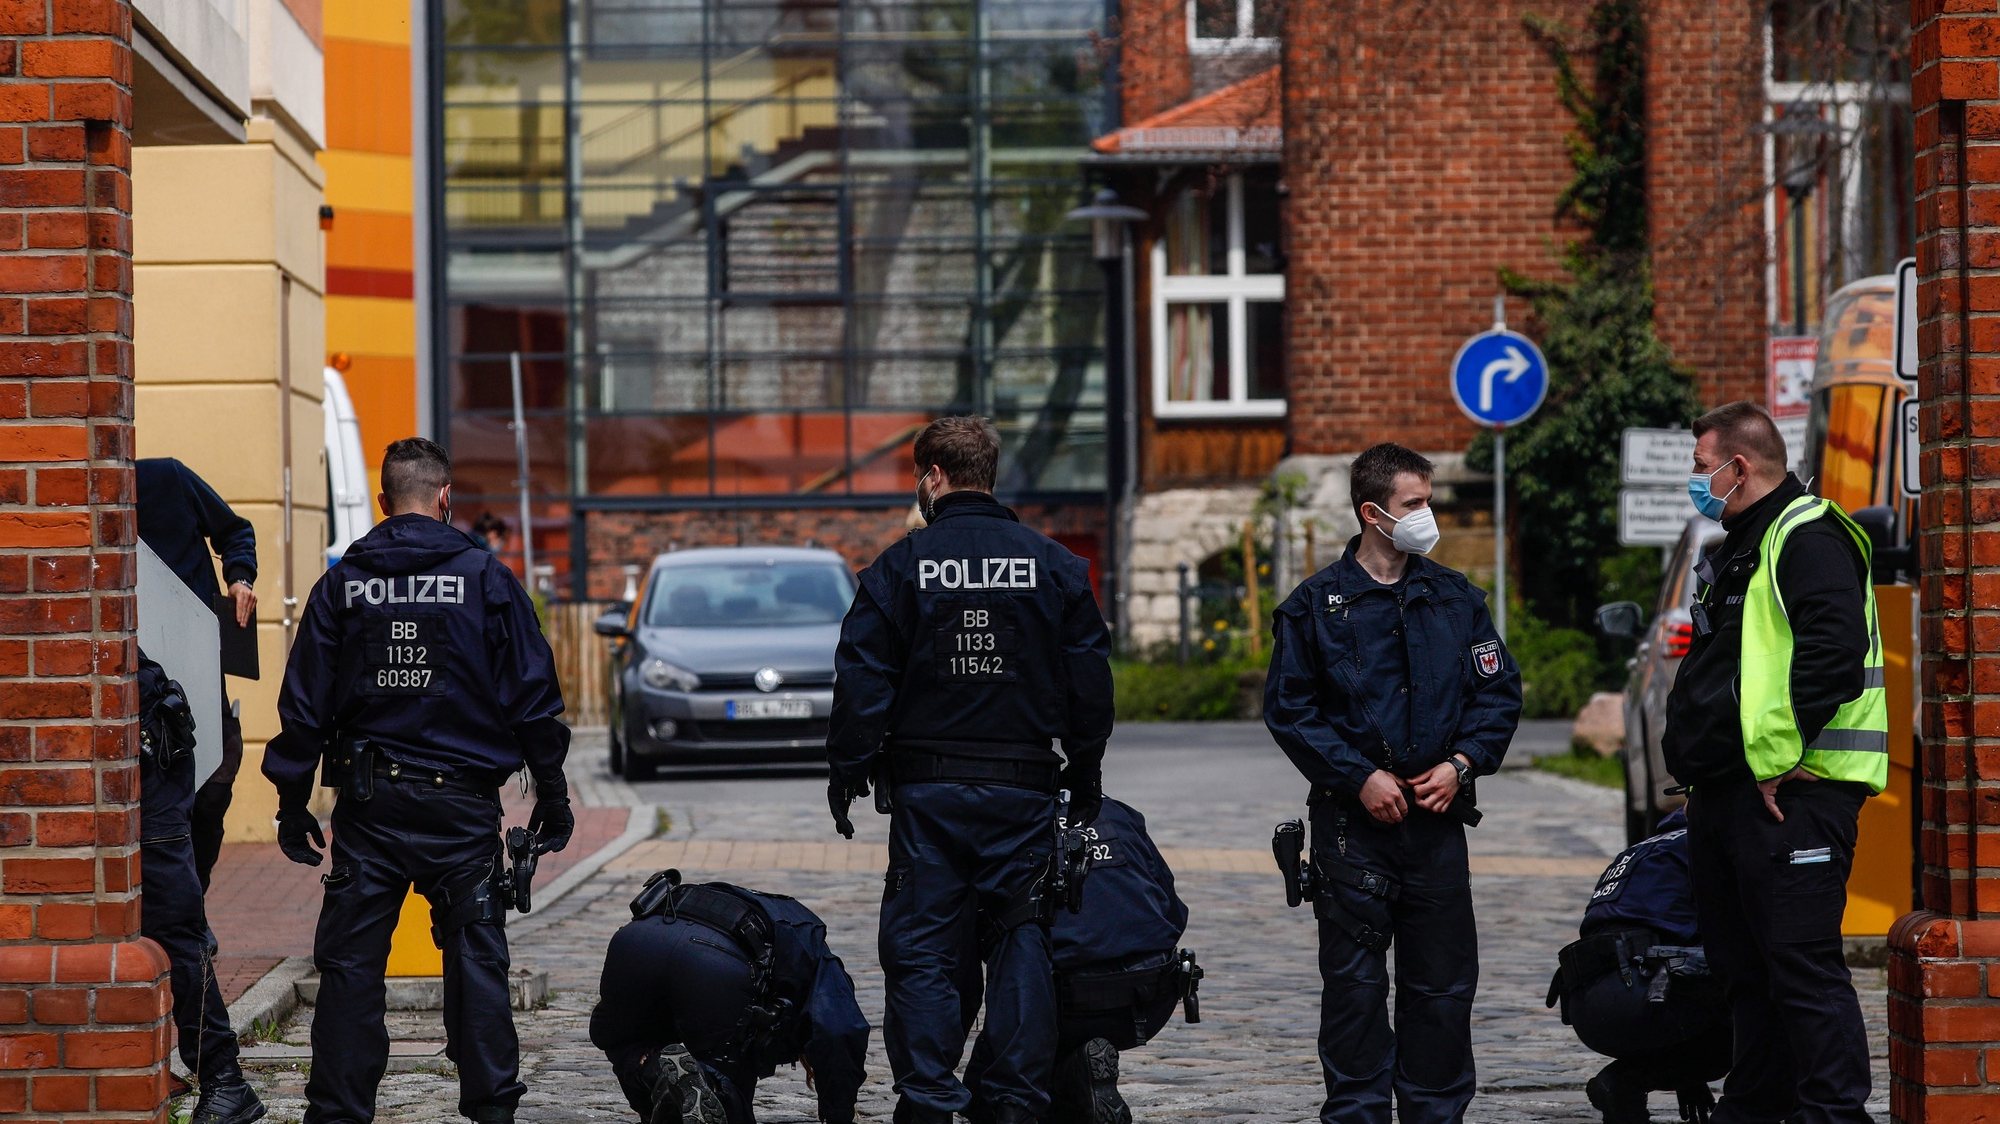 epa09167581 Police investigate in front of Oberlin care Clinic in Potsdam, Germany, 29 April 2021. German police arrested a woman on suspicion of killing four people on late evening of 28 April.  EPA/FILIP SINGER